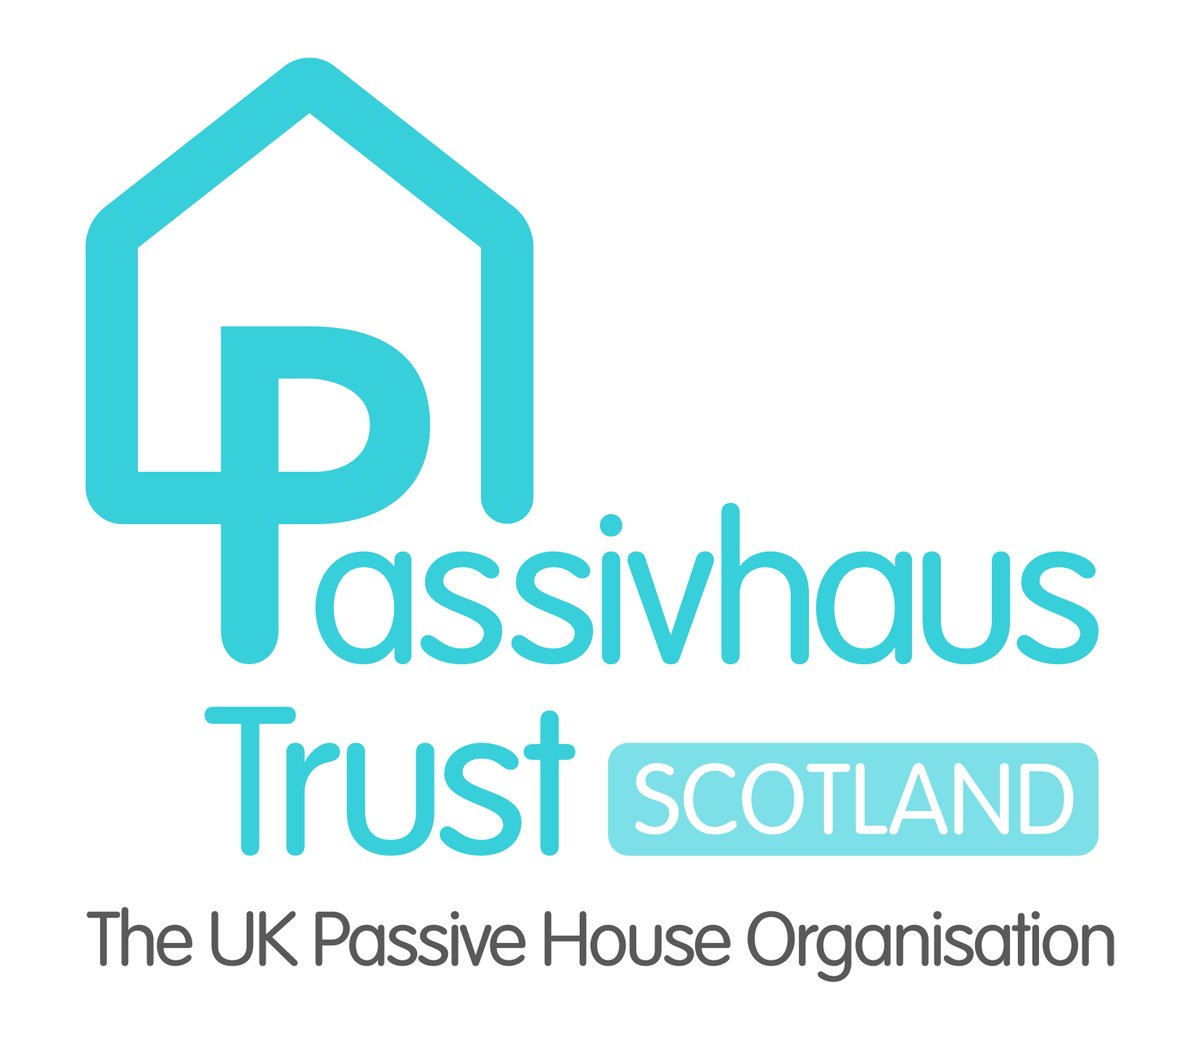 #Passivhaus peeps in #Scotland!

Join the Passivhaus Scotland meet-up next Tues 24 Jan at @ArchitypeUK Edinburgh offices.

Great chance to network, with lots to talk about!

RSVP: bit.ly/PHTScotlandmee…

@SarahASLewis @jonoahines @RIASmembership @ScotEcoDesign @ArchitectsCAN